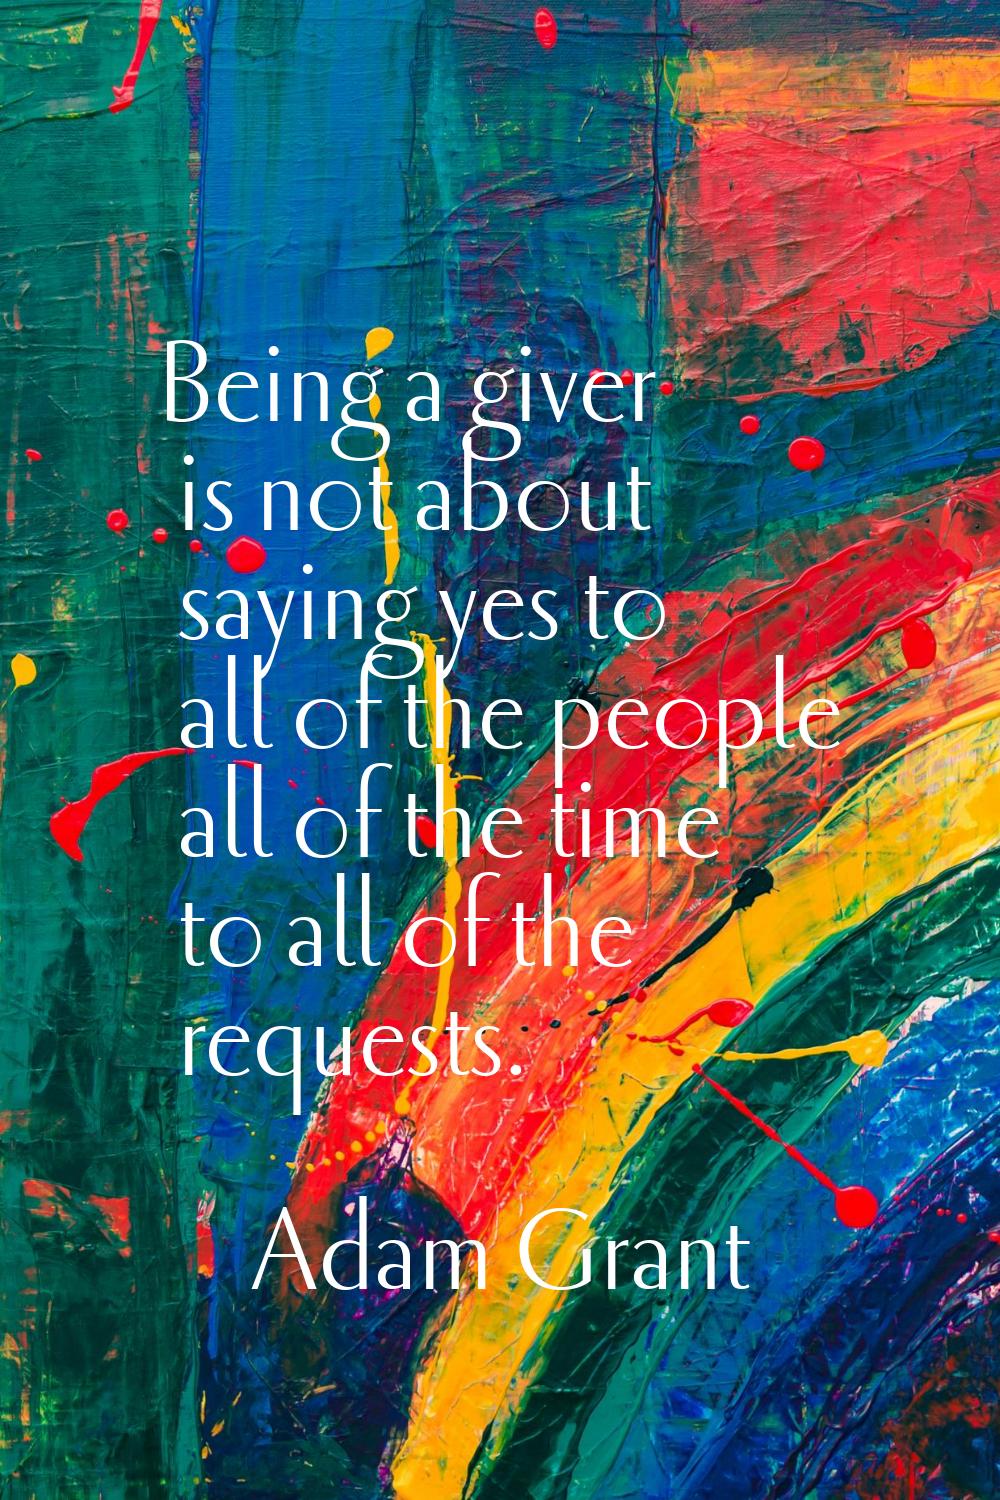 Being a giver is not about saying yes to all of the people all of the time to all of the requests.